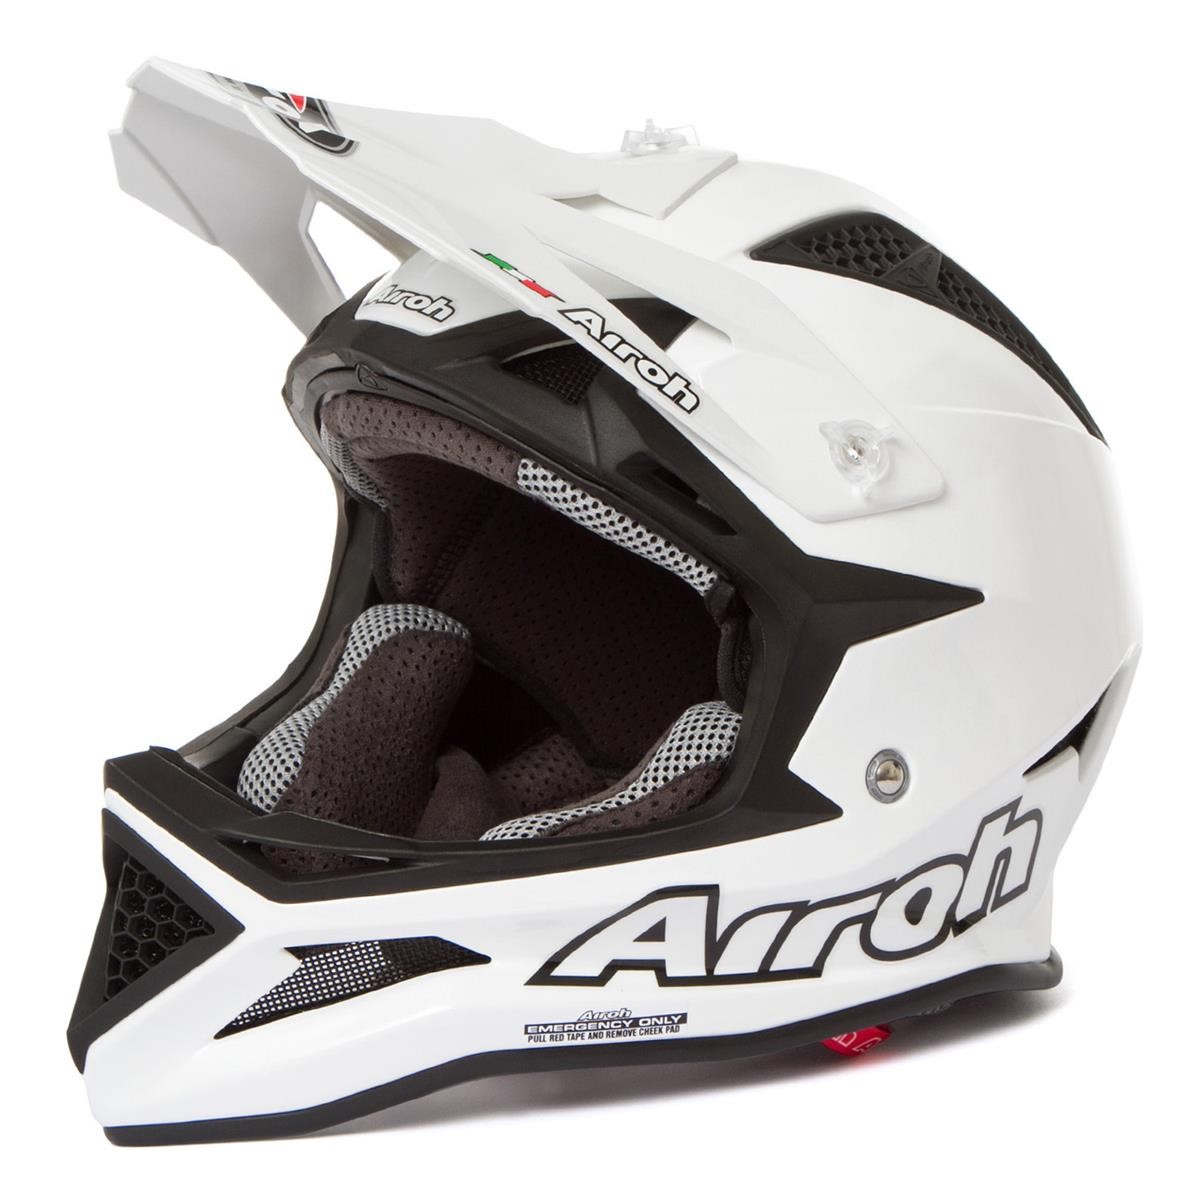 Airoh Downhill MTB Helmet Fighters Color - Gloss White